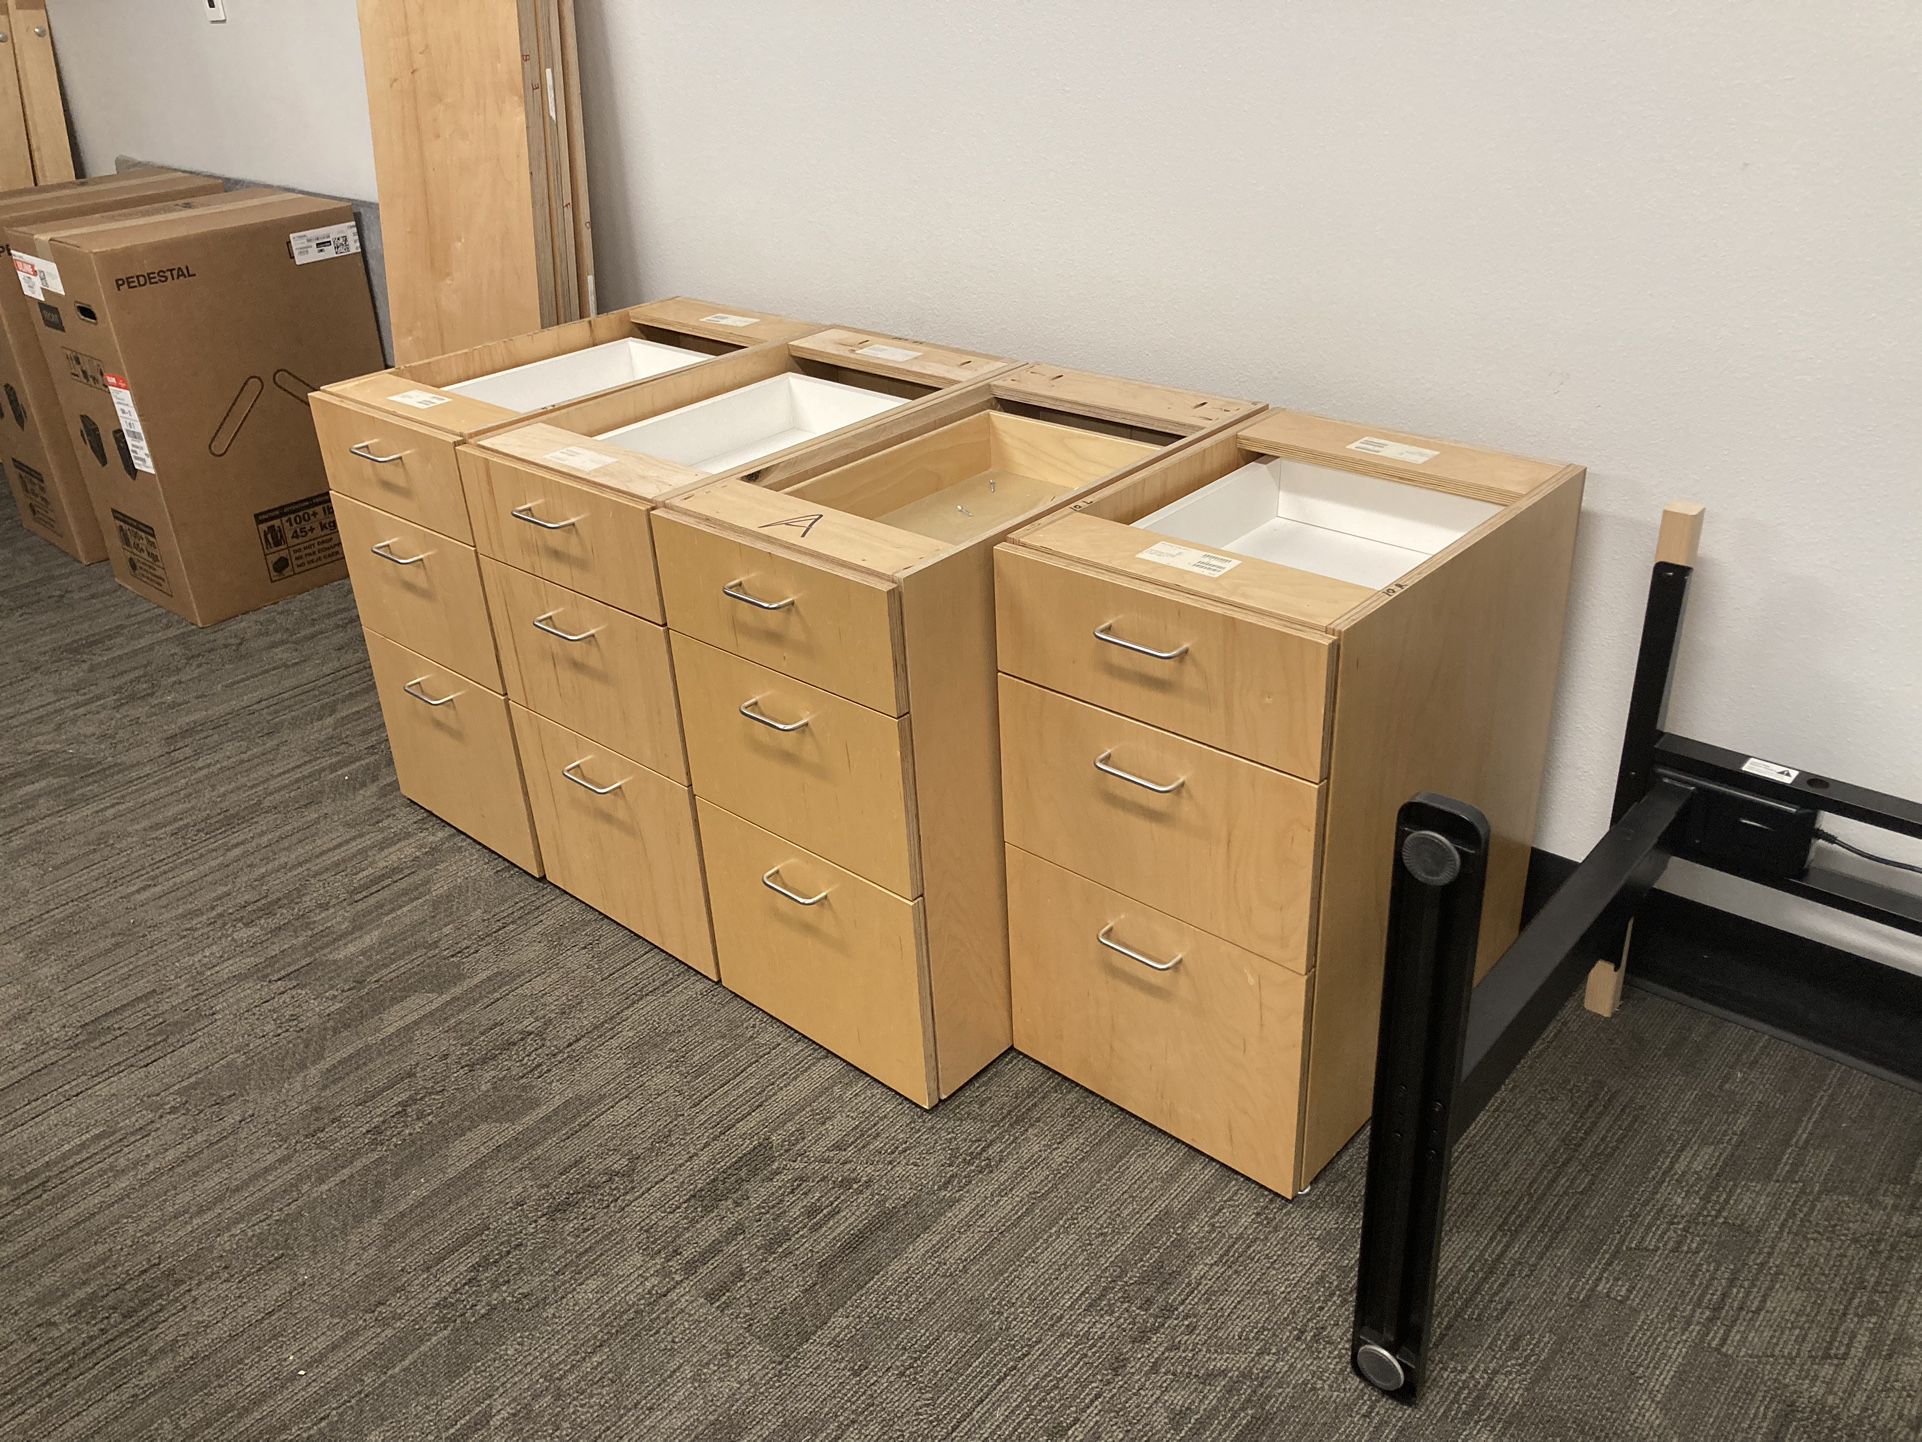 Four - 3 Drawer, Wood File Cabinets 